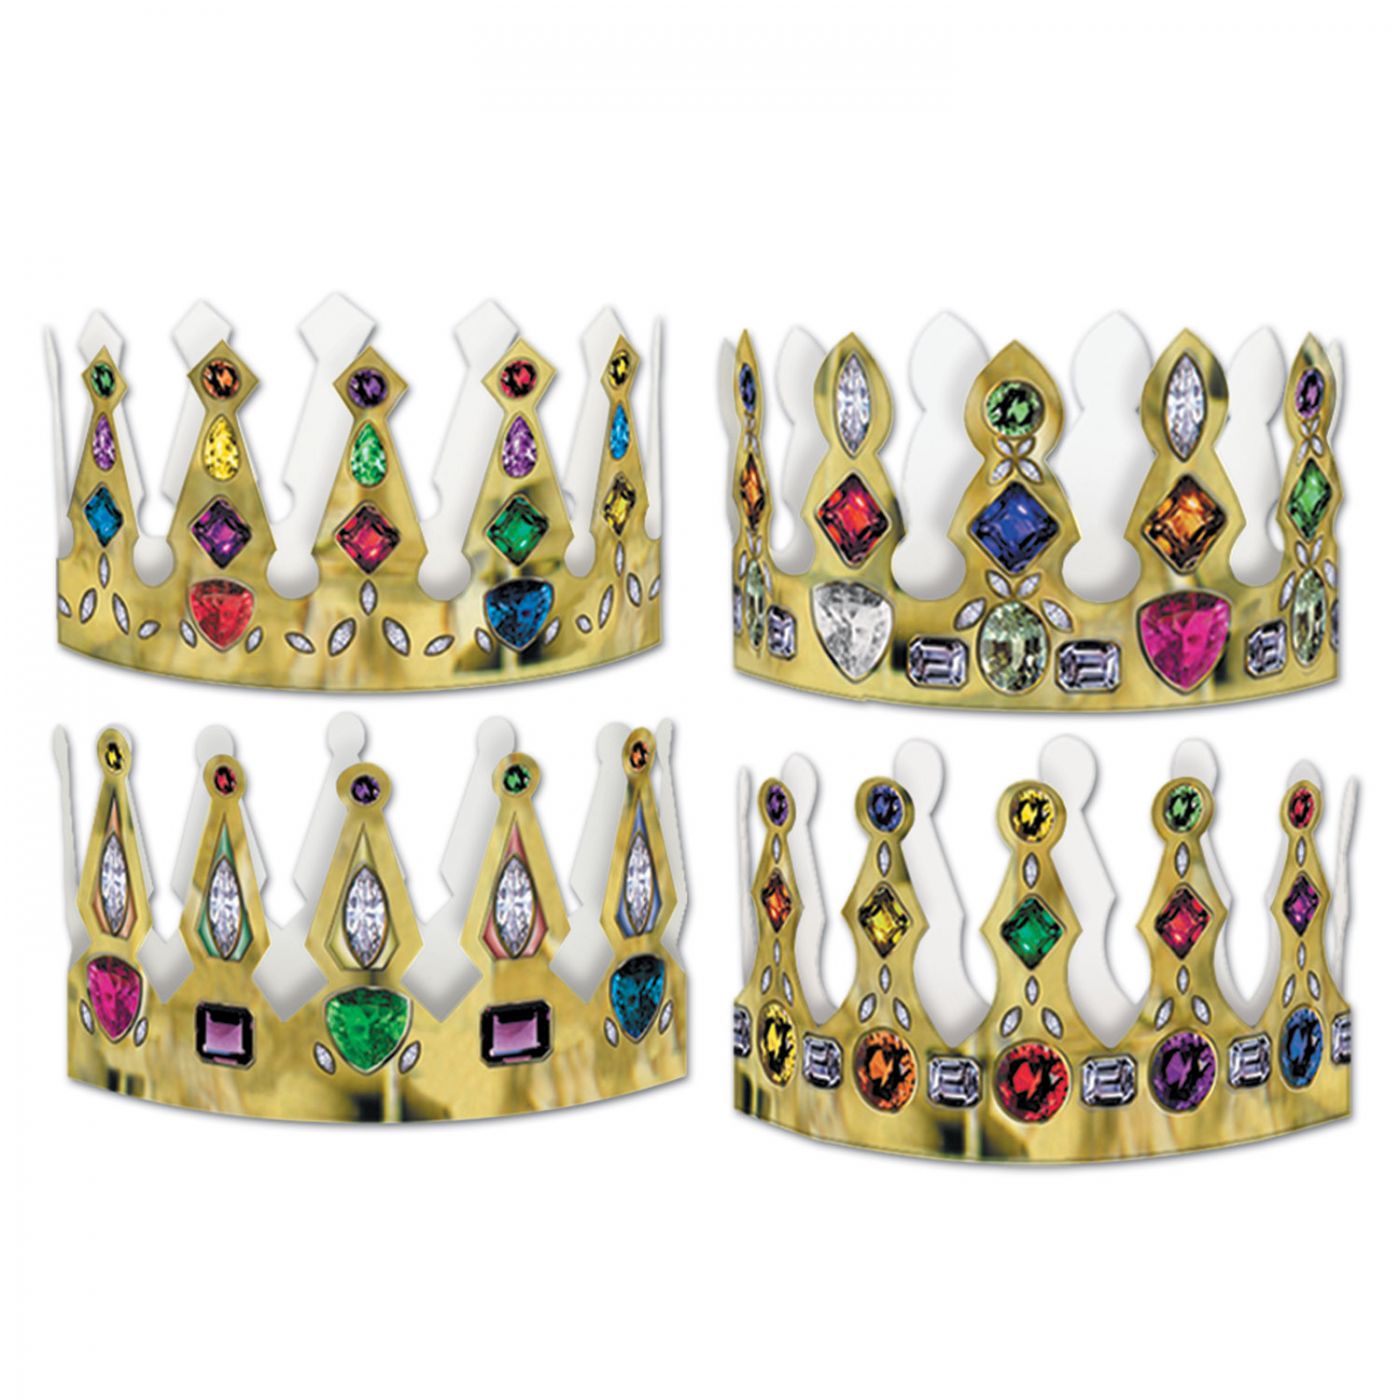 Pkgd Printed Jeweled Crowns image